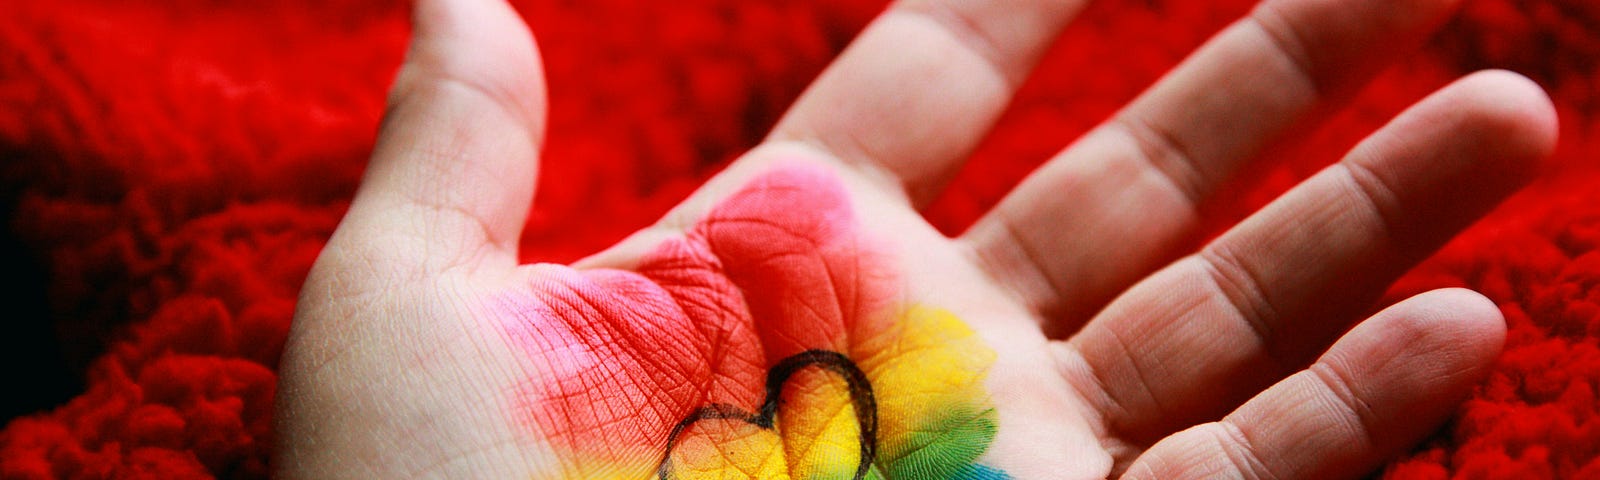 A hand with the rainbow flag painted. A heart is drawn in the centre